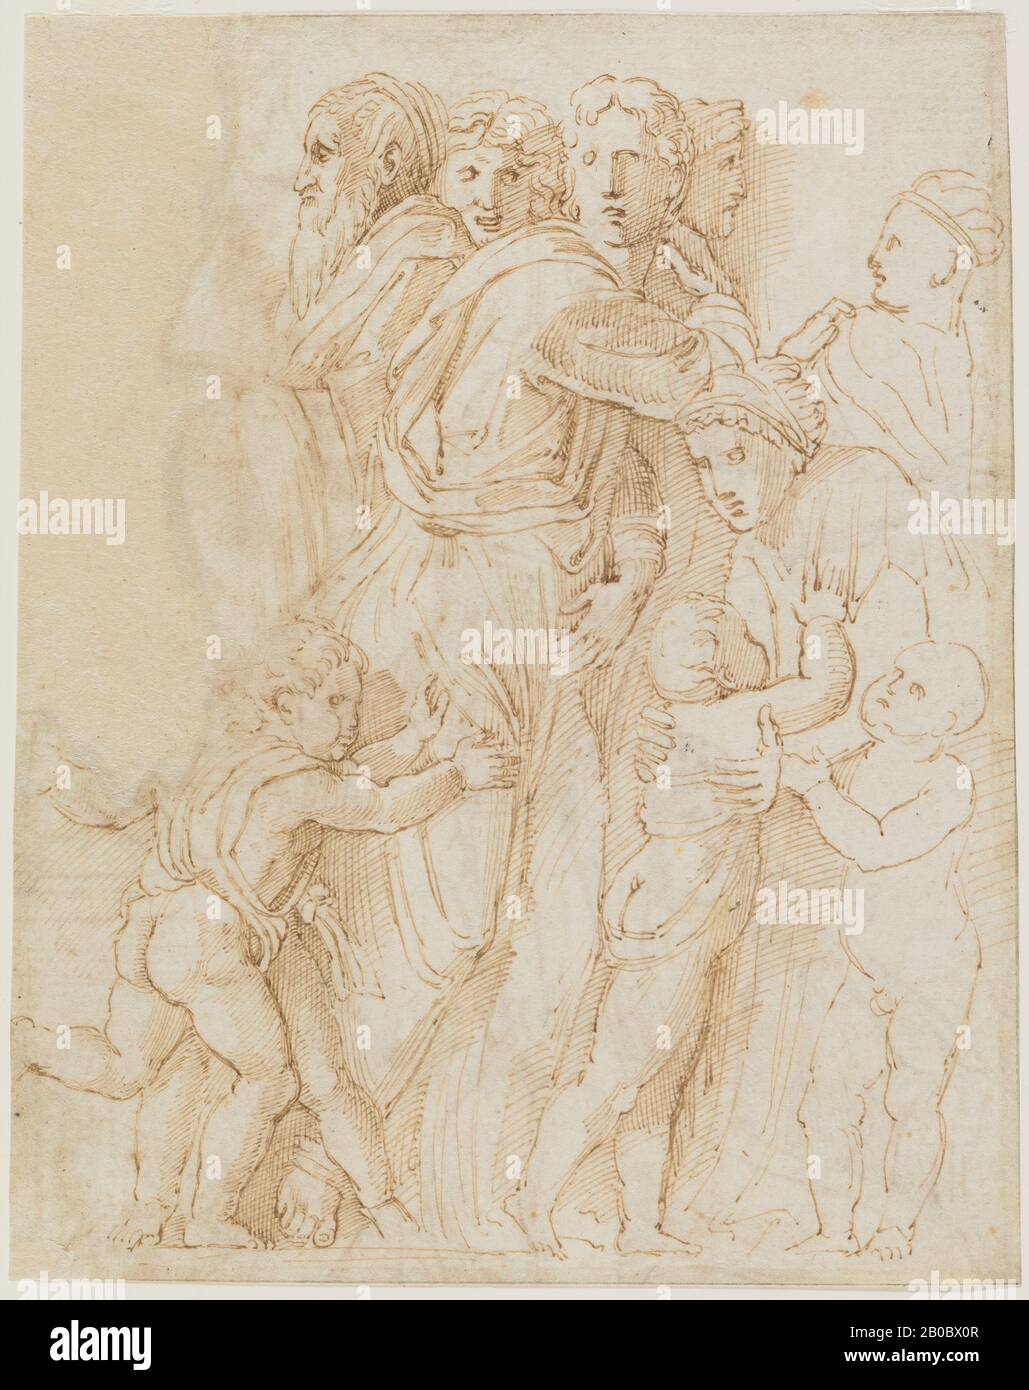 Raphael, Copy from Donatello's 'Miracle of the Miser's Heart' (recto), ca.1505-1520, pen and brown ink on paper, 10 1/16 in. x 8 in. (25.56 cm. x 20.32 cm.), Recognized as one of the most talented artists in history, Raphael honed his skills and trained his assistants through the imitation of established models. Copying was then and still is today a significant part of the formal training of any budding artist and often complements the study of live models. Raphael referenced the work of Donatello (ca. 1386--1466) many times throughout his career. The three figures drawn in this study after a Stock Photo